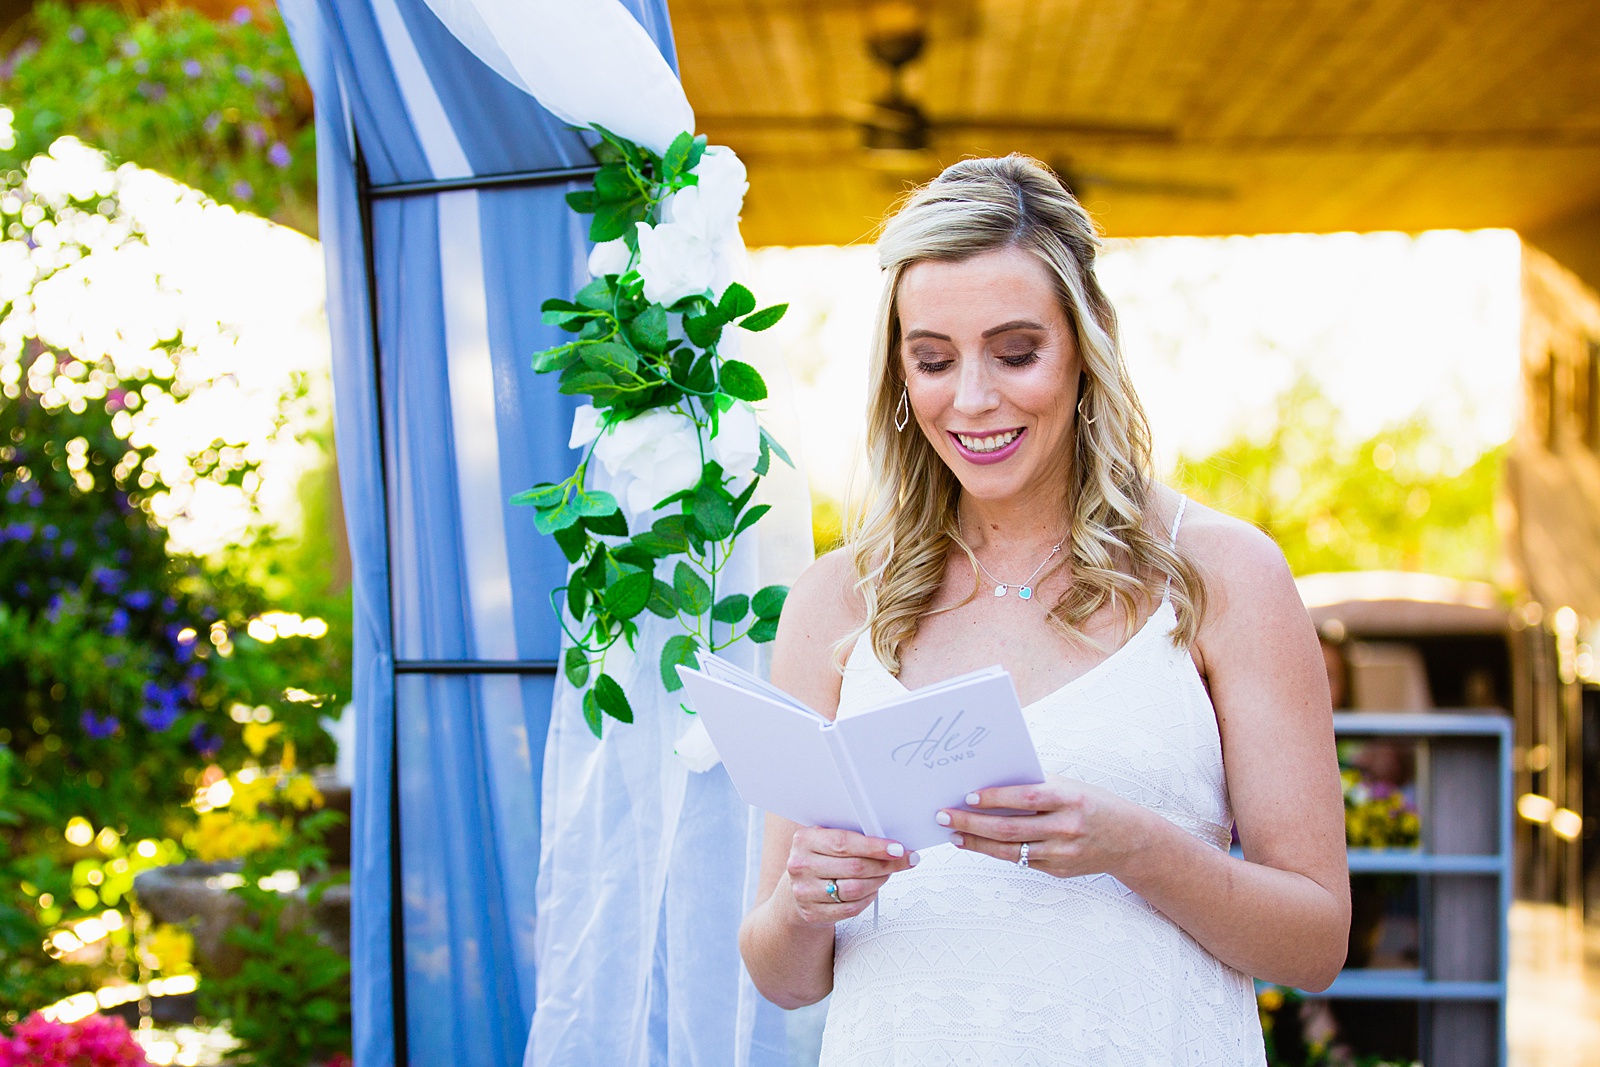 Bride reading vows to her groom during their wedding ceremony at a backyard by Scottsdale wedding photographer PMA Photography.